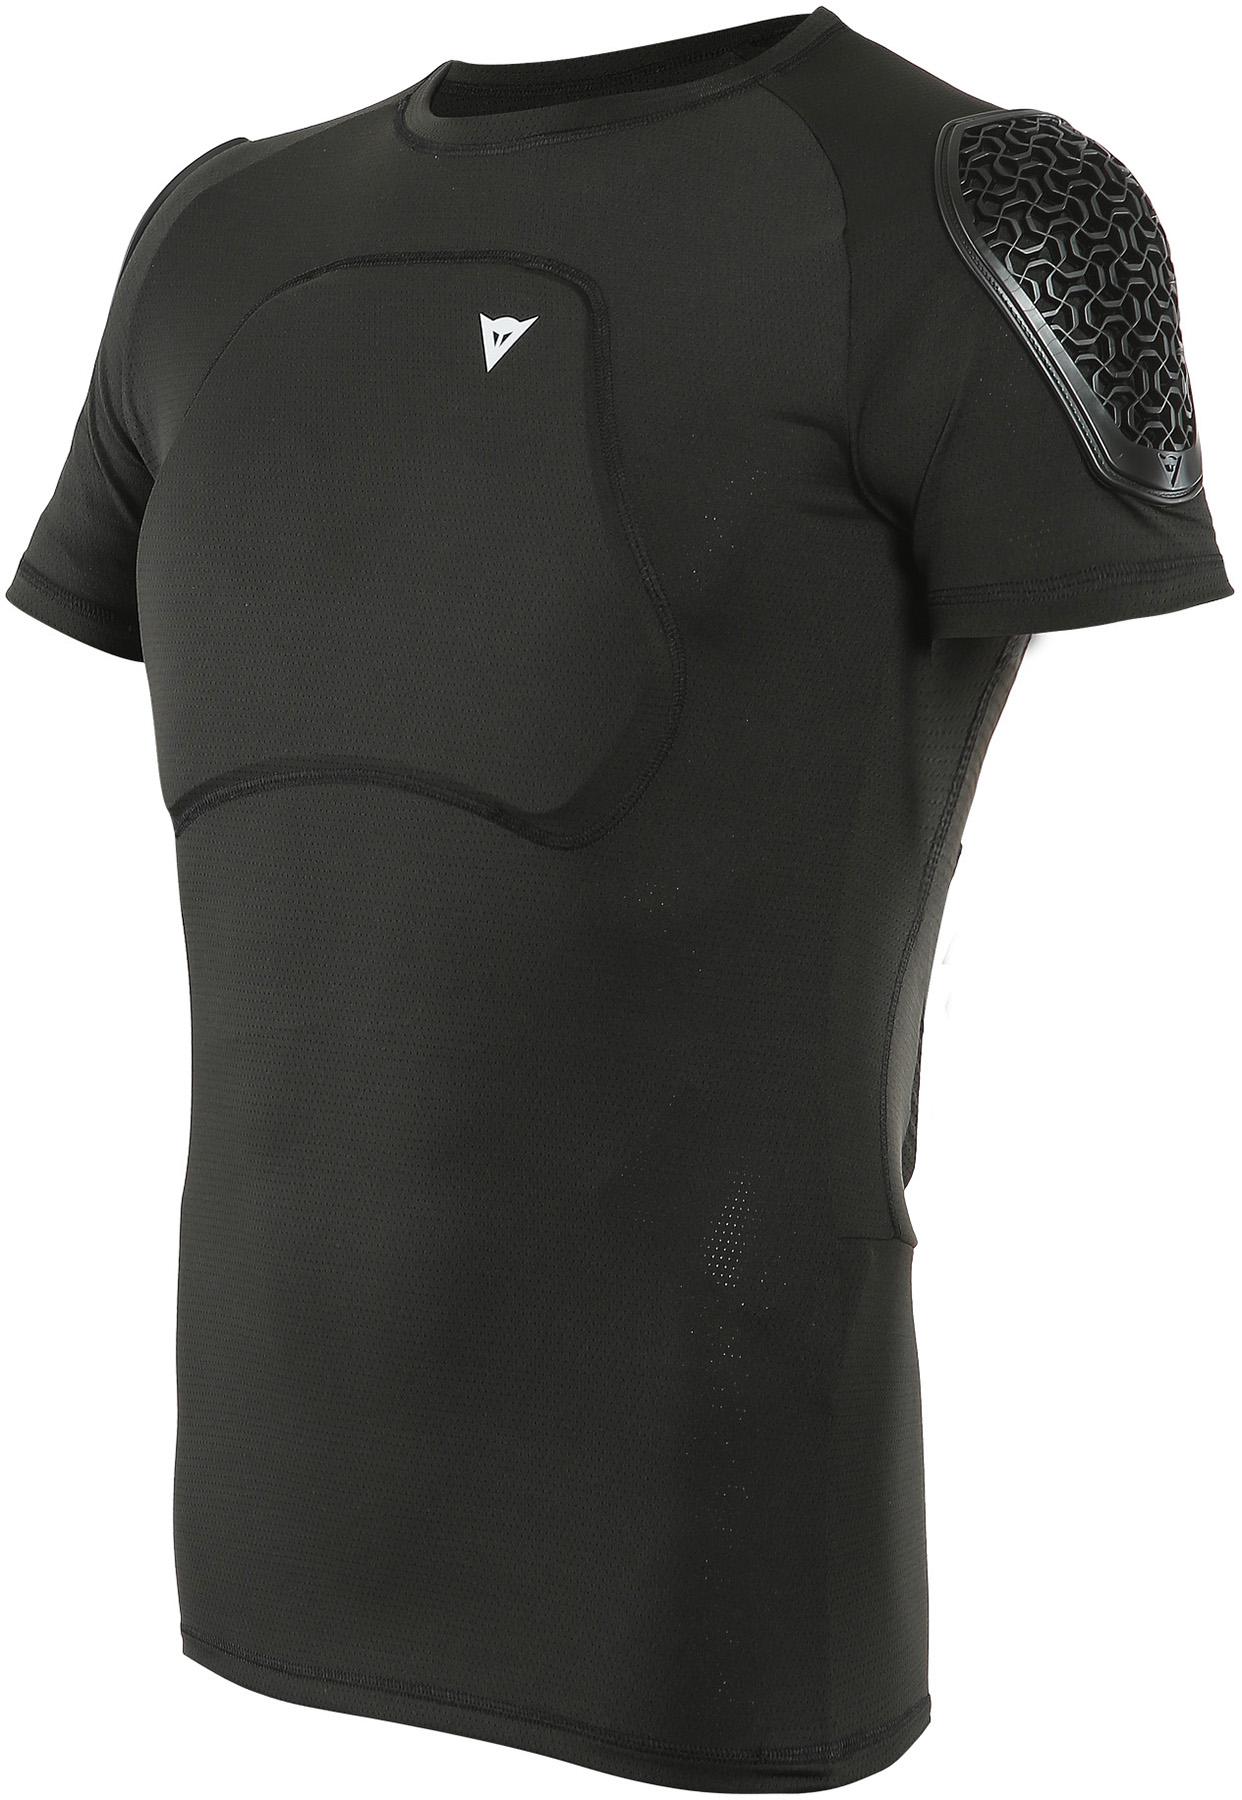 Dainese Trail Skins Pro Armour Tee - Black